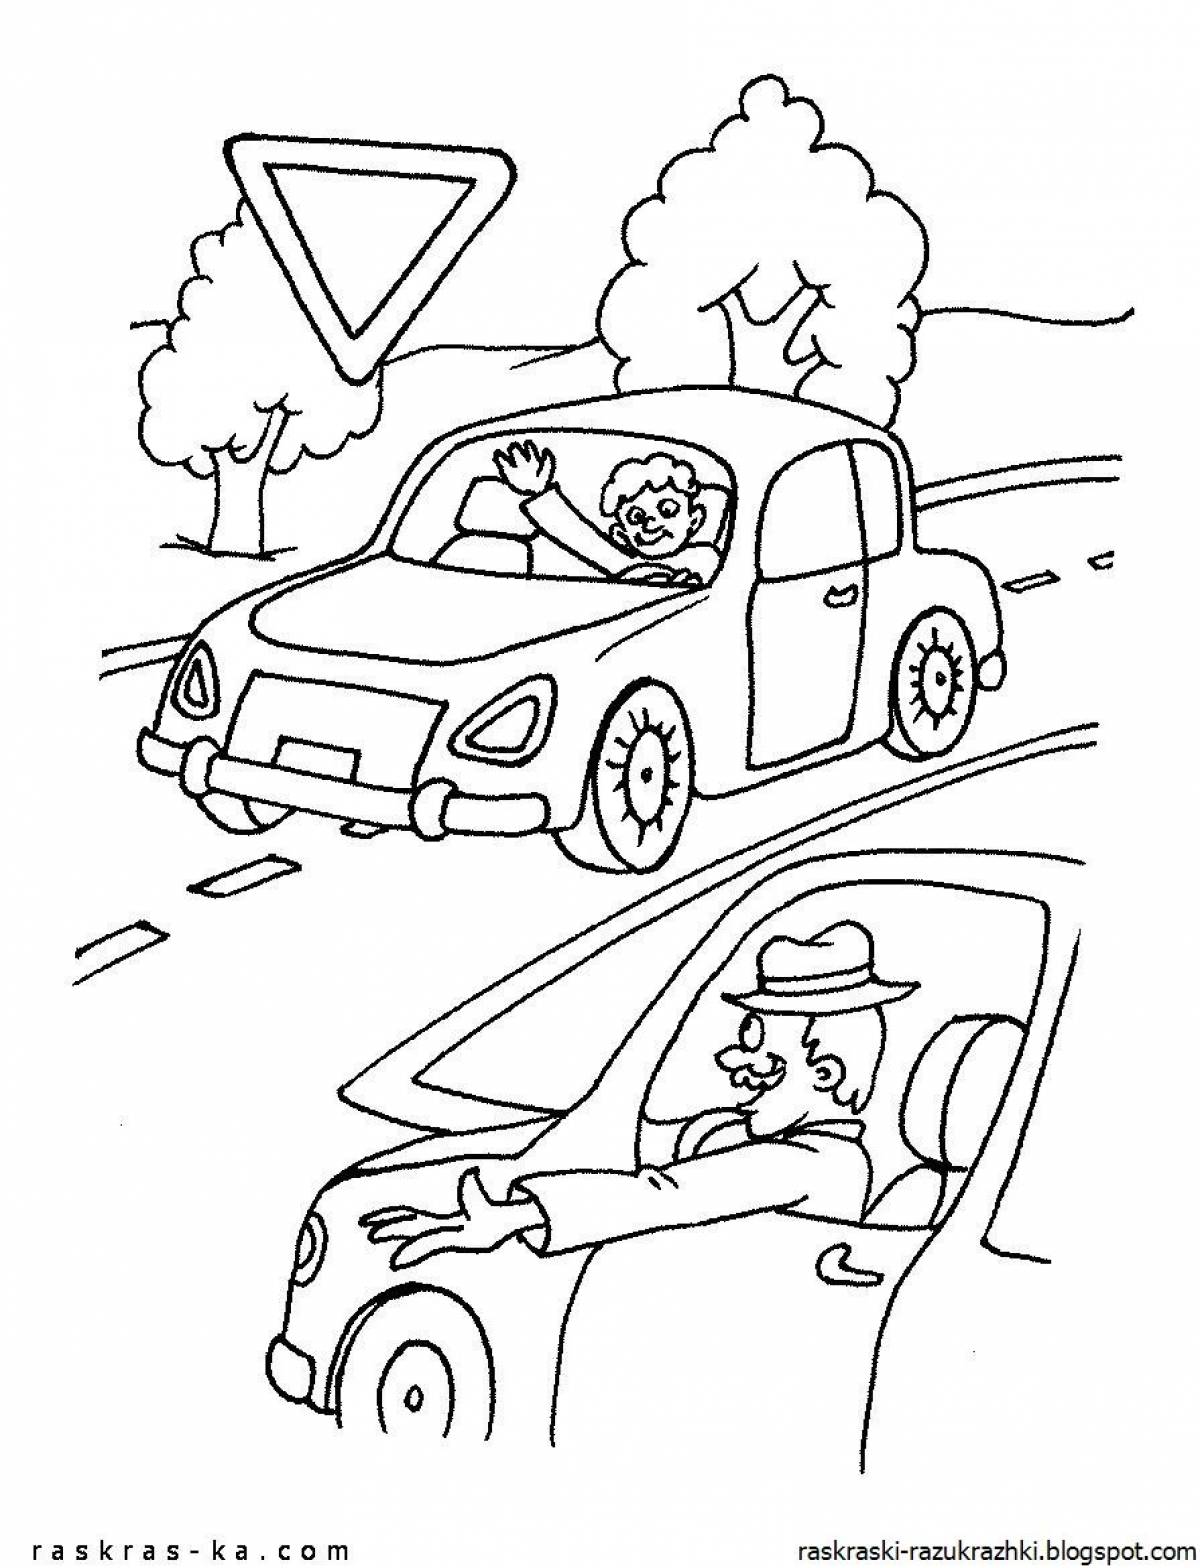 Inspirational traffic safety coloring pages for kids